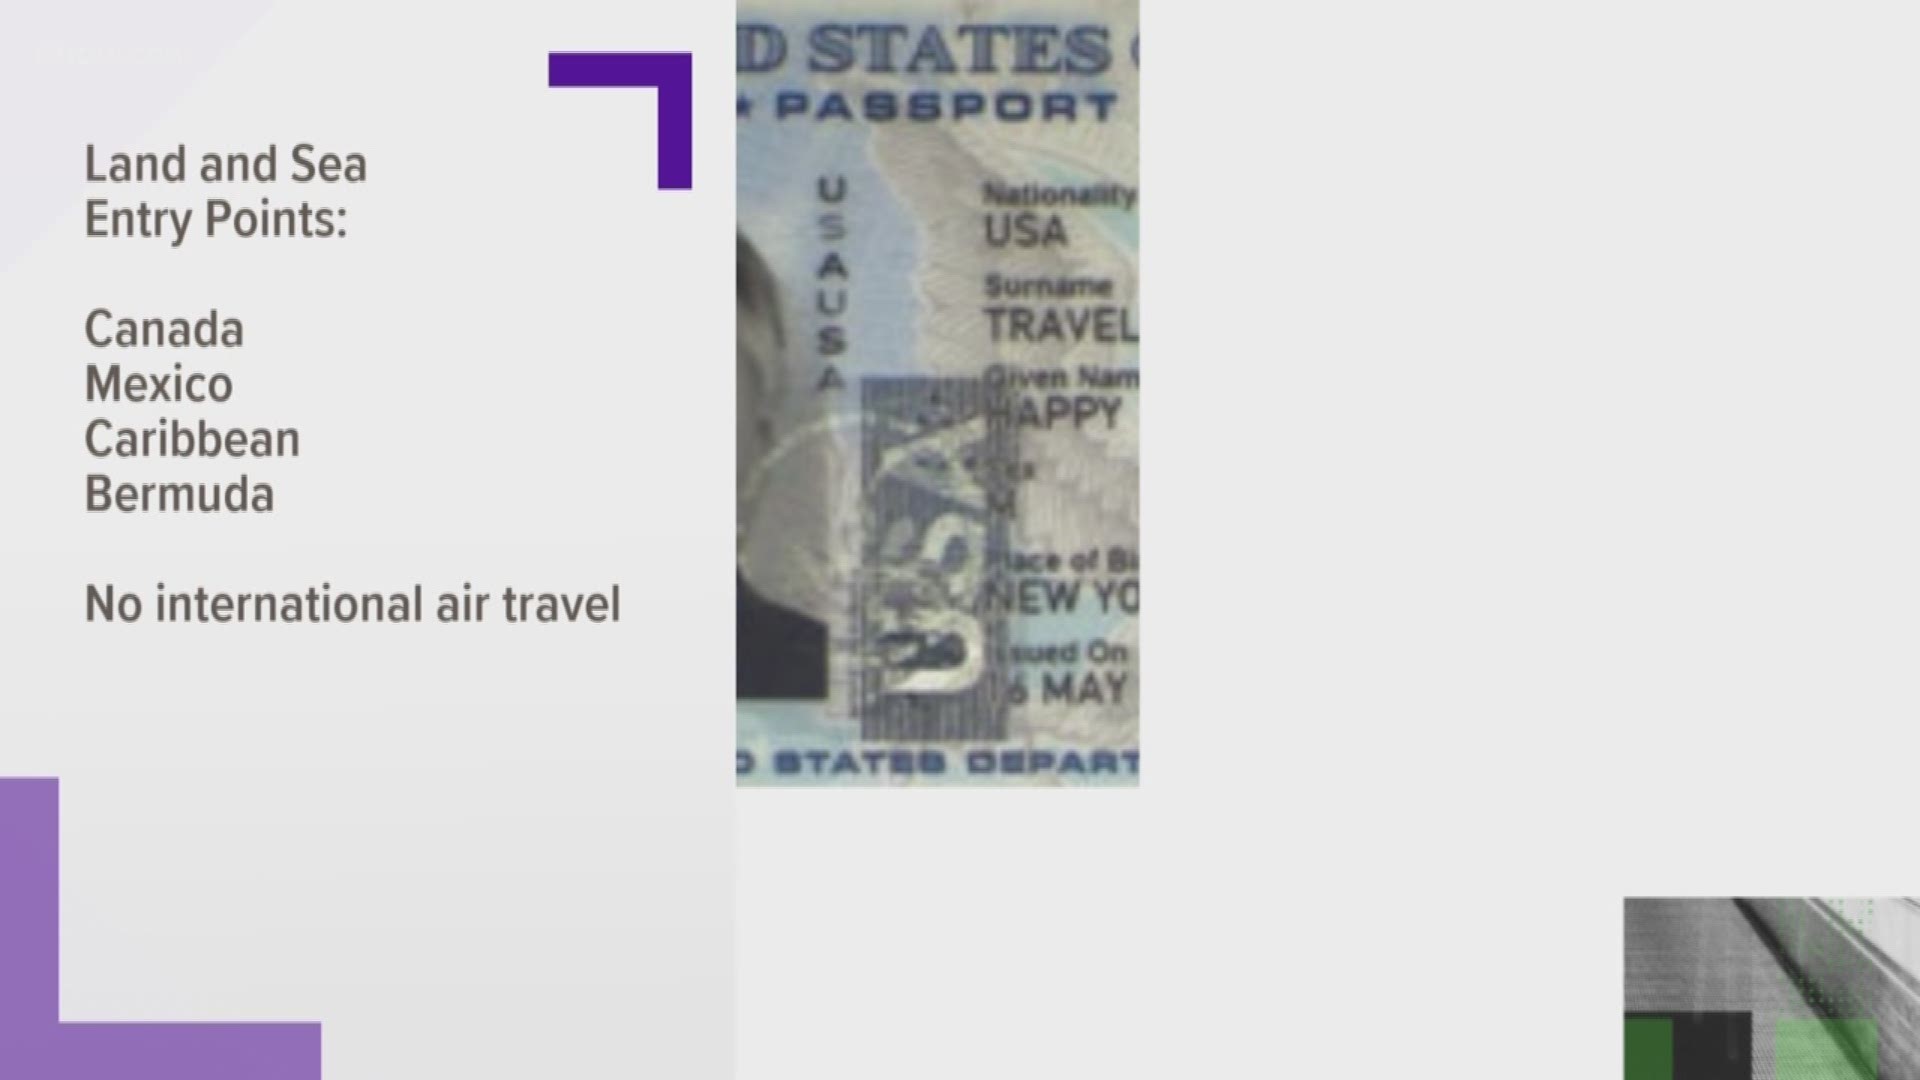 Our Verify team is looking into a viewer’s question about whether you can travel with just your passport card.